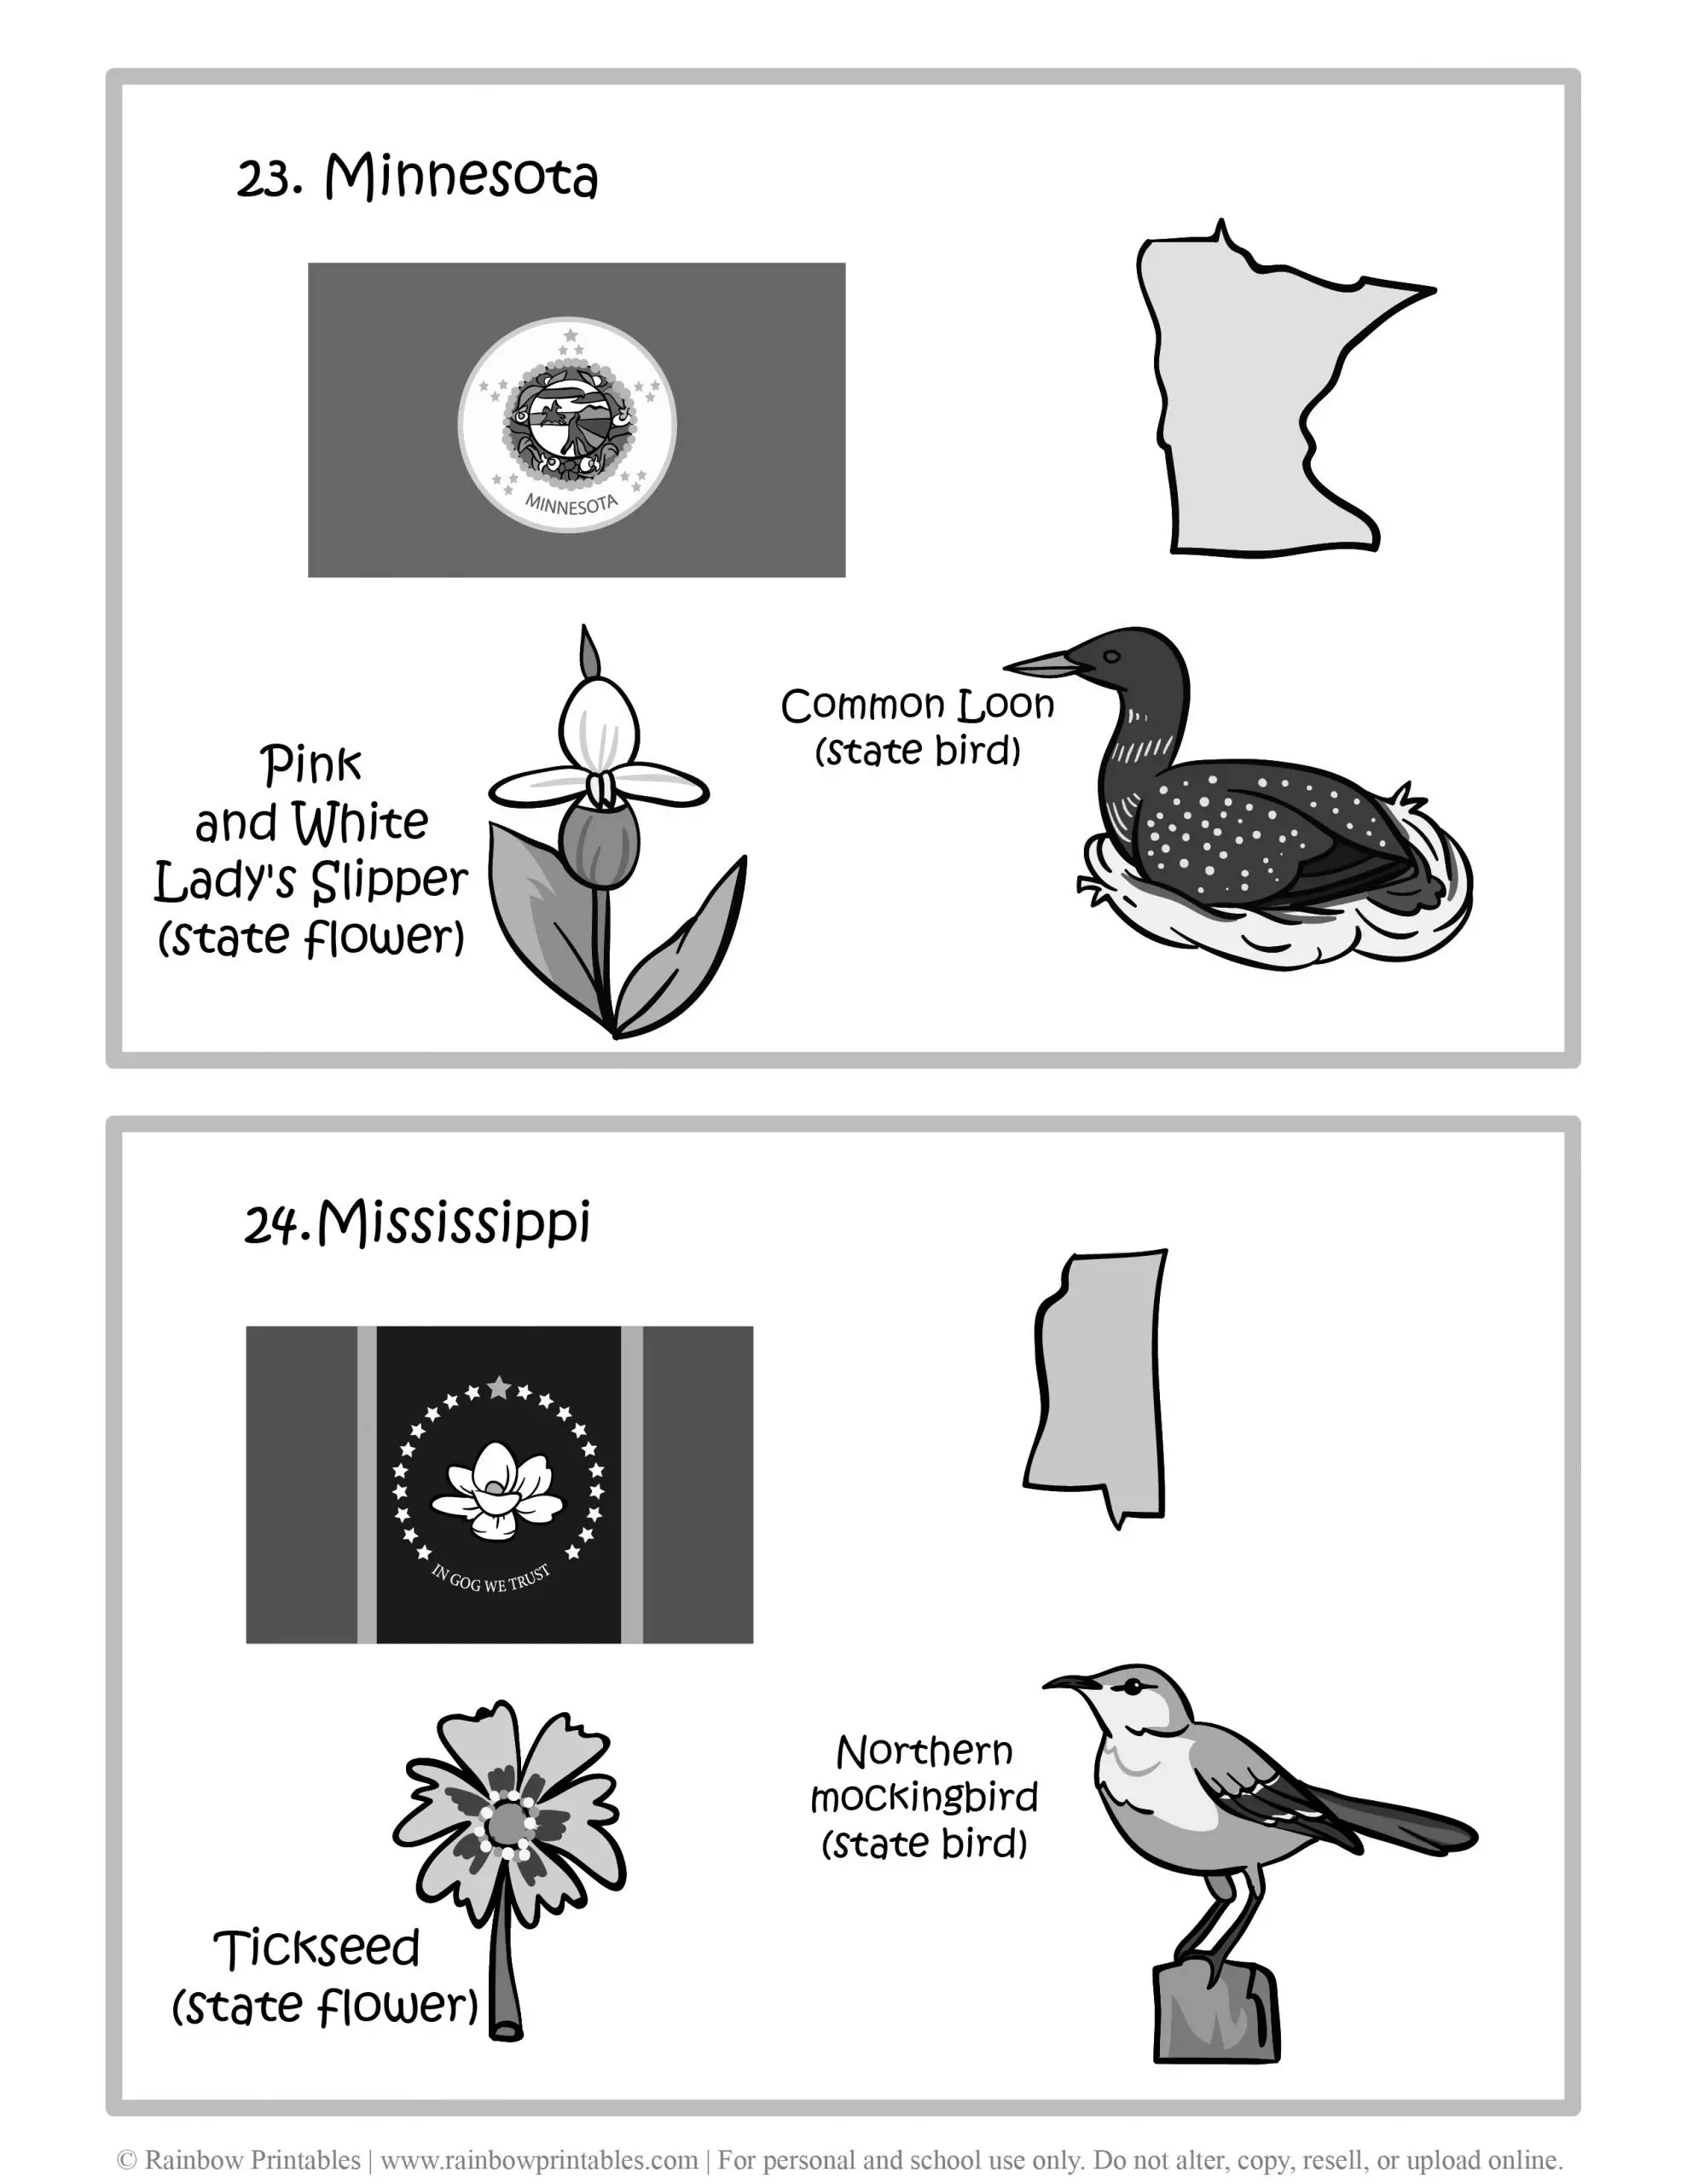 Minnesota, Mississippi, 50 US State Flag, State Bird, State Flower, United States of America - American States Geography Worksheet Class Lesson Printables Flashcards Black White